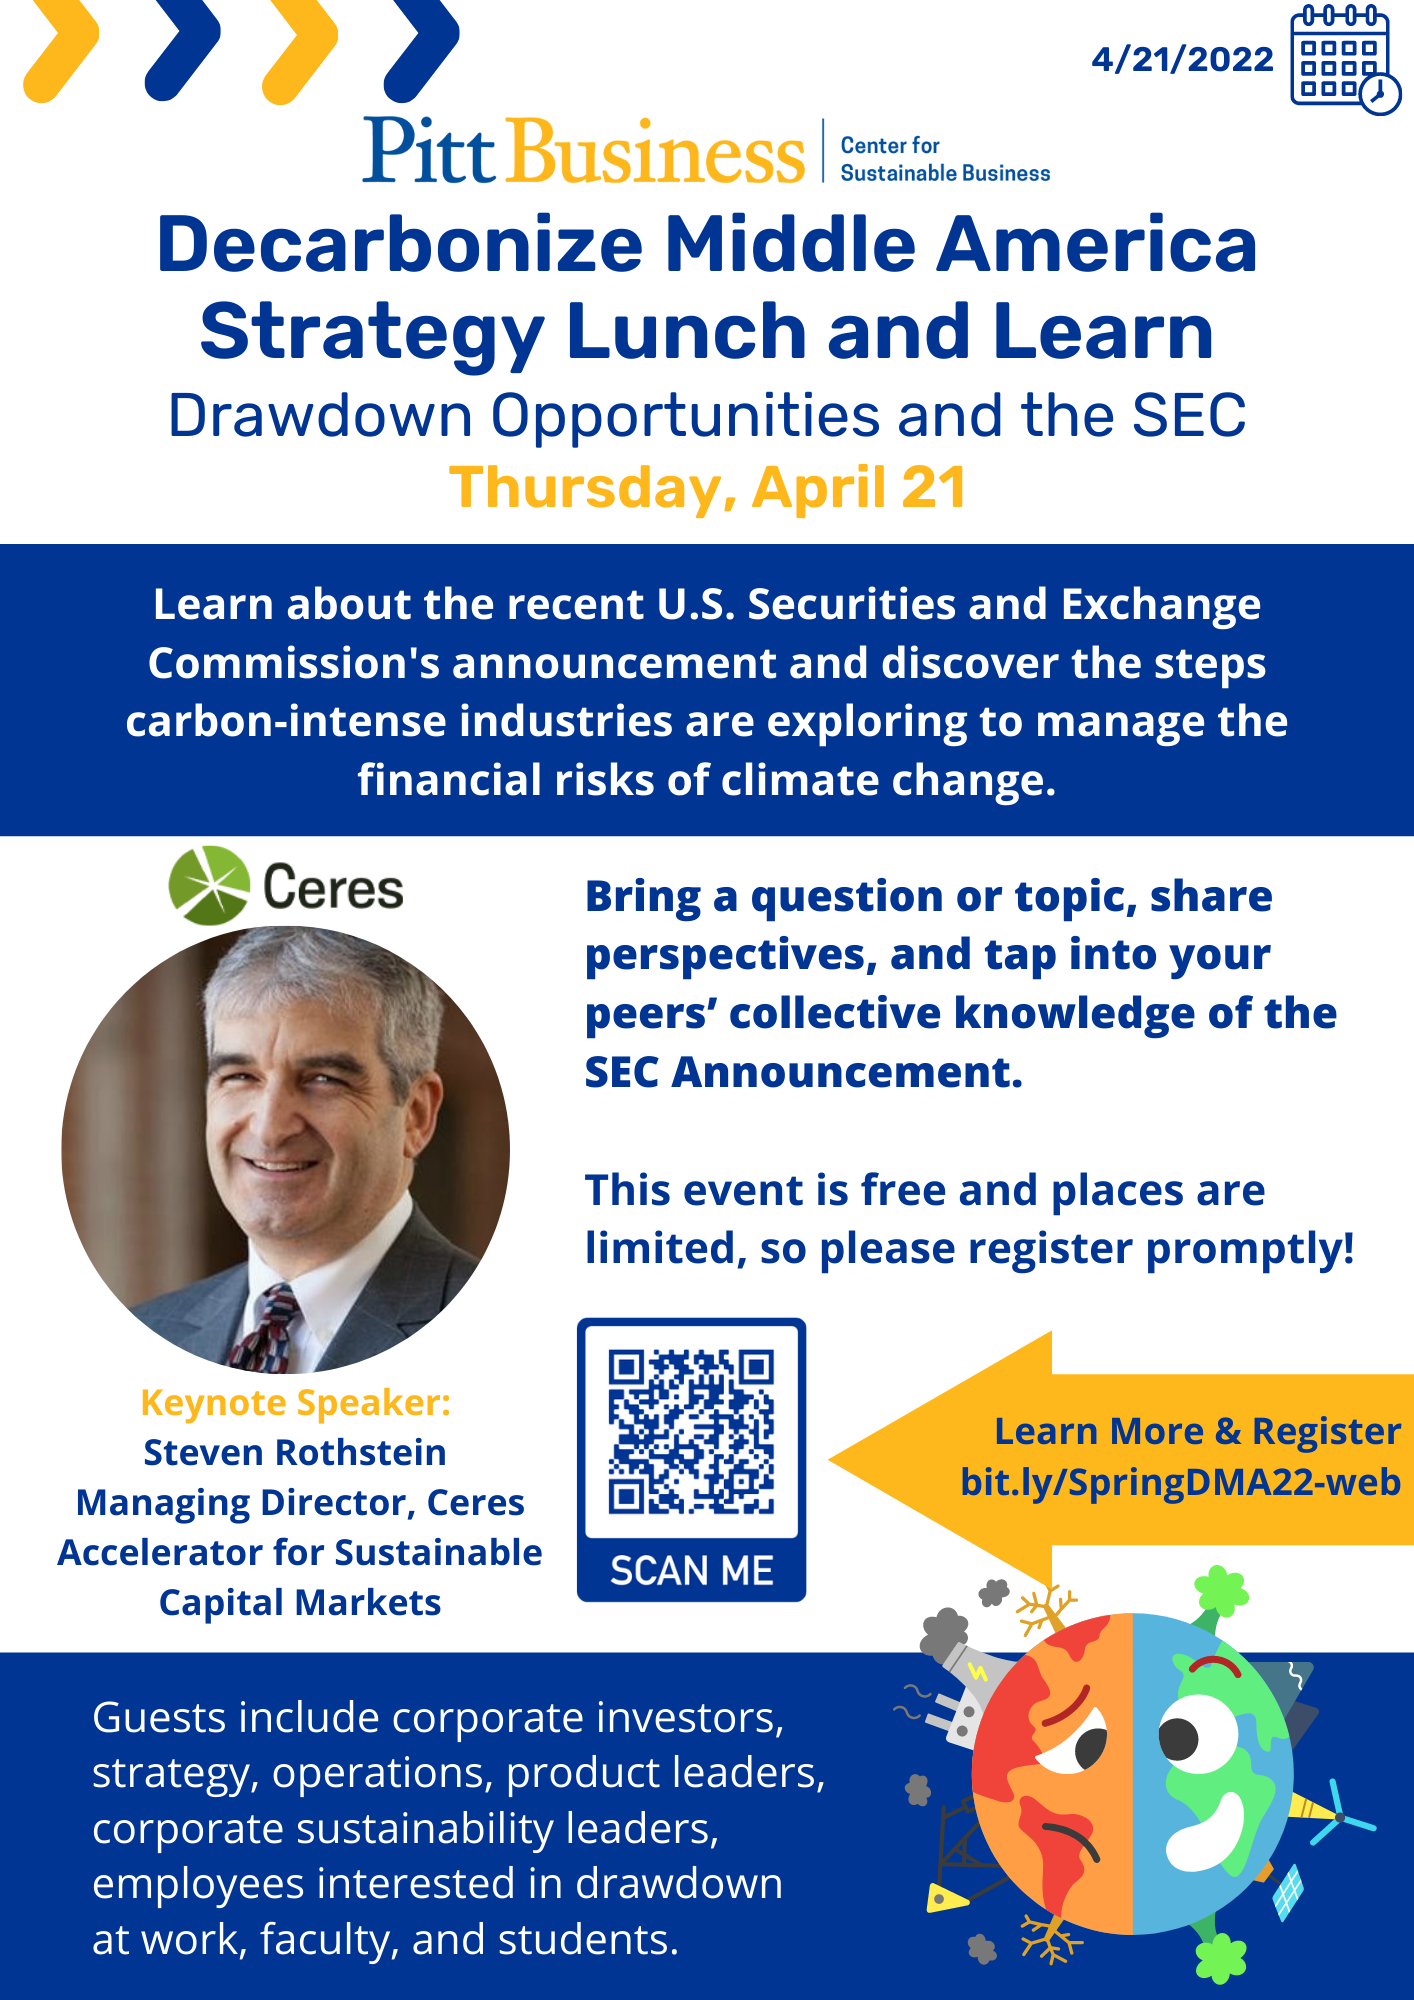 Virtual Decarbonize Middle America Strategy Lunch and Learn: Drawdown Opportunities and the SEC